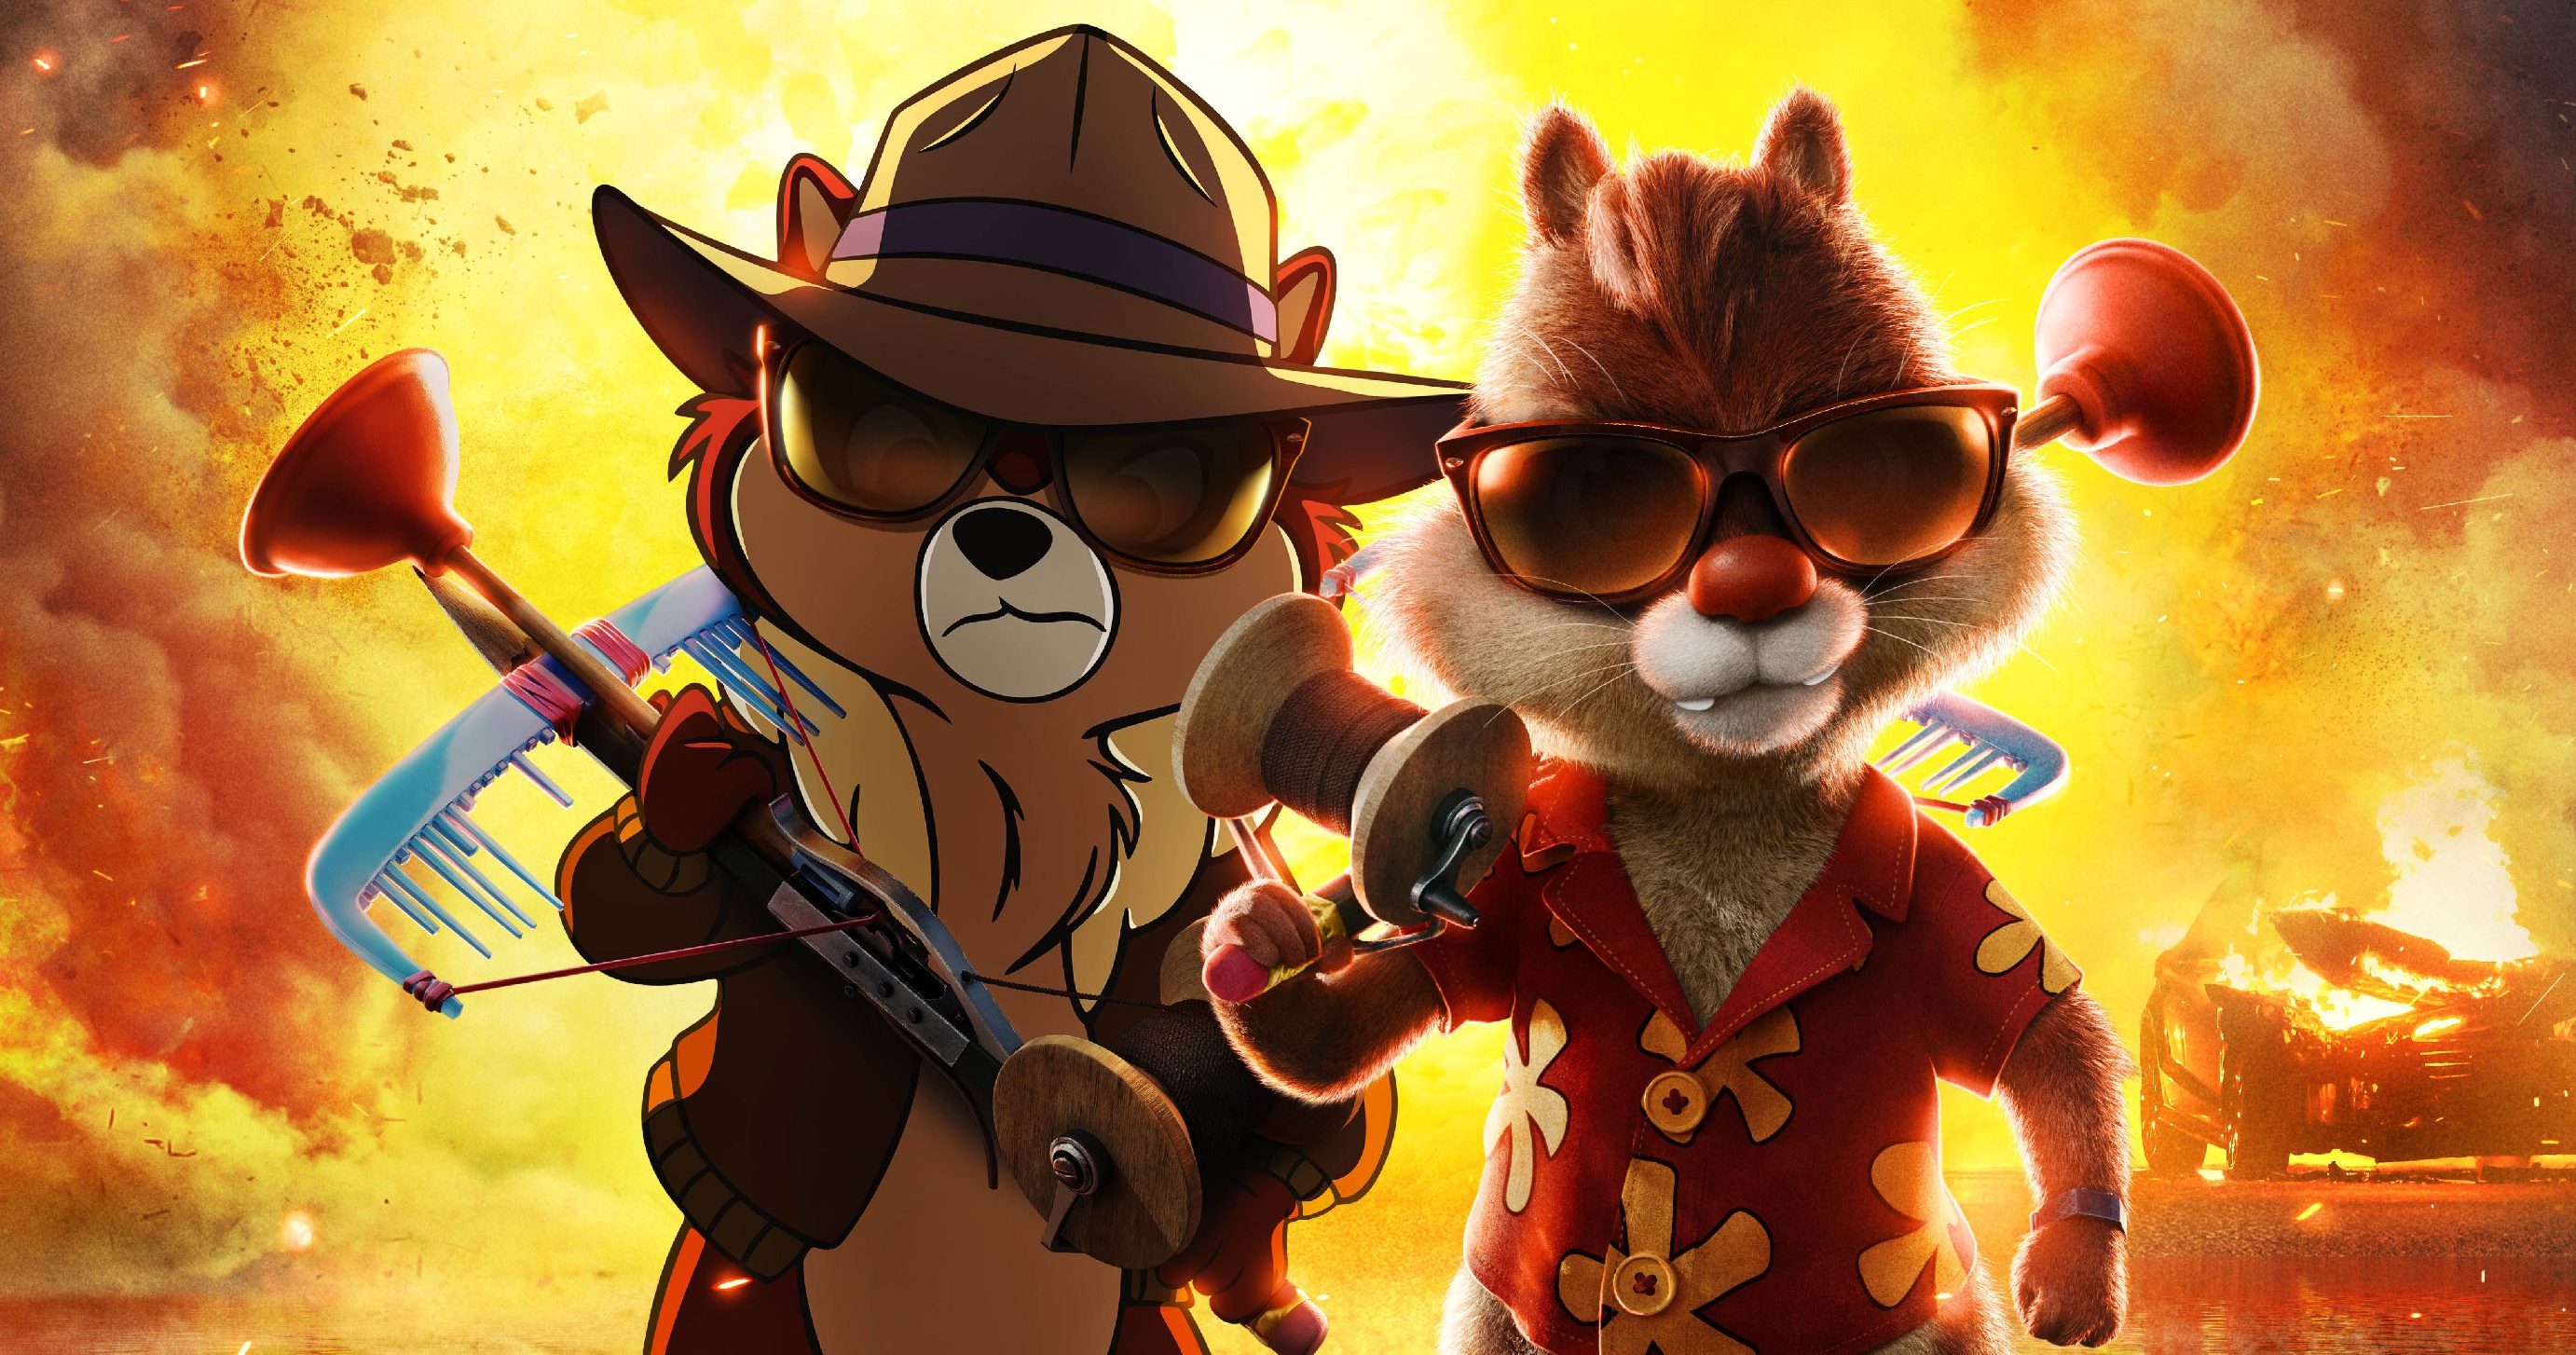 ‘Chip ‘n Dale: Rescue Rangers’ Gets A New Trailer And Poster